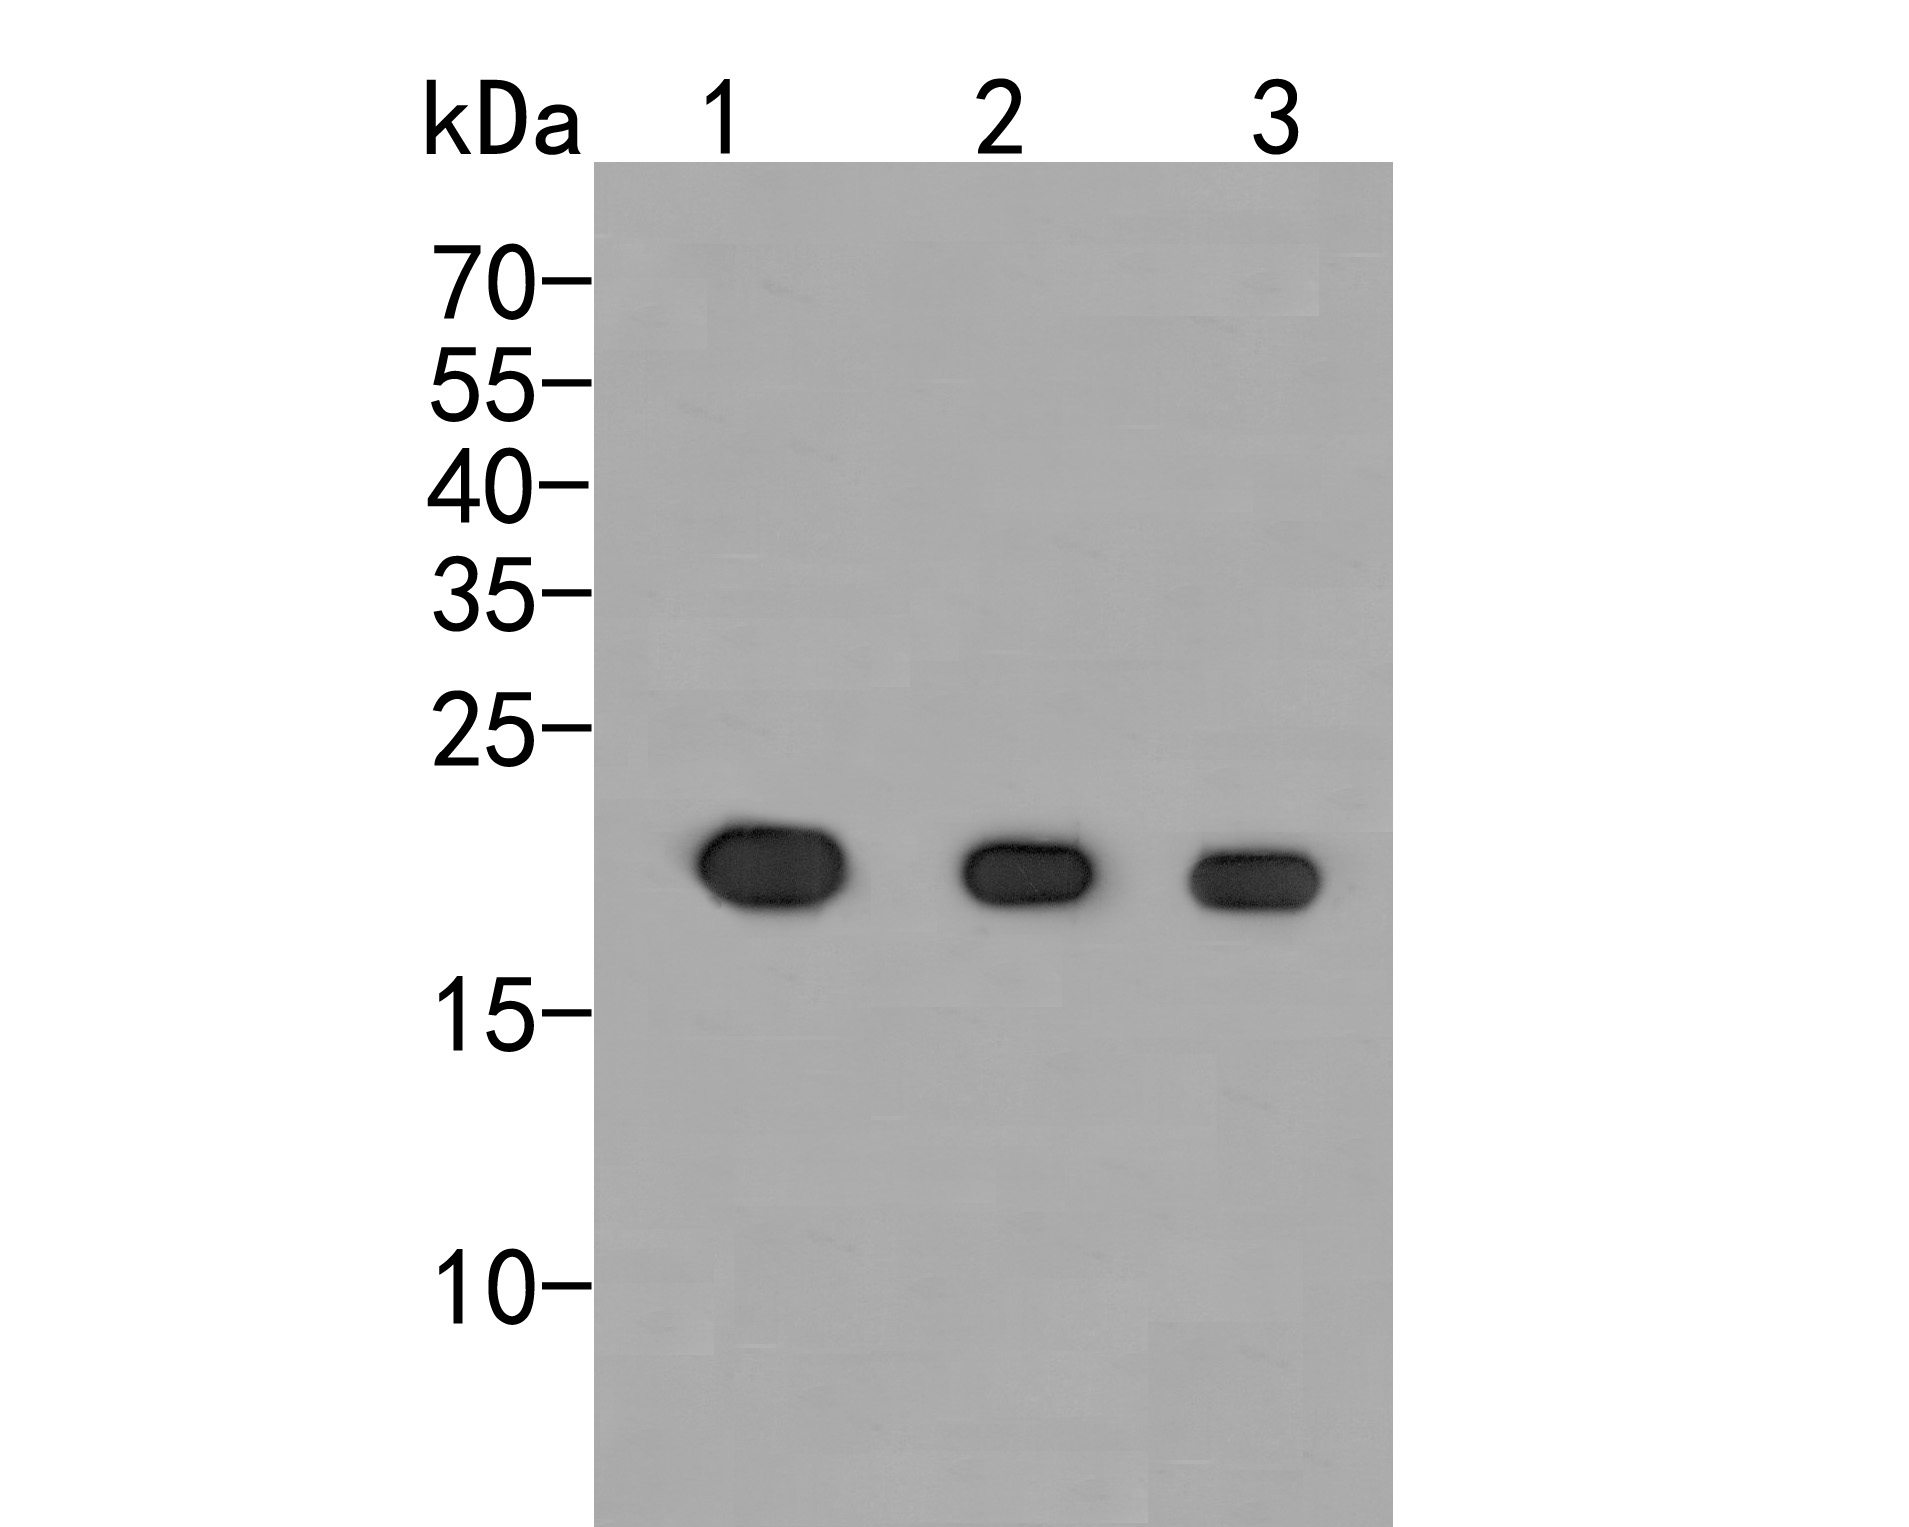 Western blot analysis of p21 ARC on different lysates. Proteins were transferred to a PVDF membrane and blocked with 5% BSA in PBS for 1 hour at room temperature. The primary antibody (HA500005, 1/500) was used in 5% BSA at room temperature for 2 hours. Goat Anti-Rabbit IgG - HRP Secondary Antibody (HA1001) at 1:5,000 dilution was used for 1 hour at room temperature.<br />
Positive control: <br />
Lane 1: THP-1 cell lysate <br />
Lane 2: Rat lung tissue lysate<br />
Lane 3: Mouse lung tissue lysate